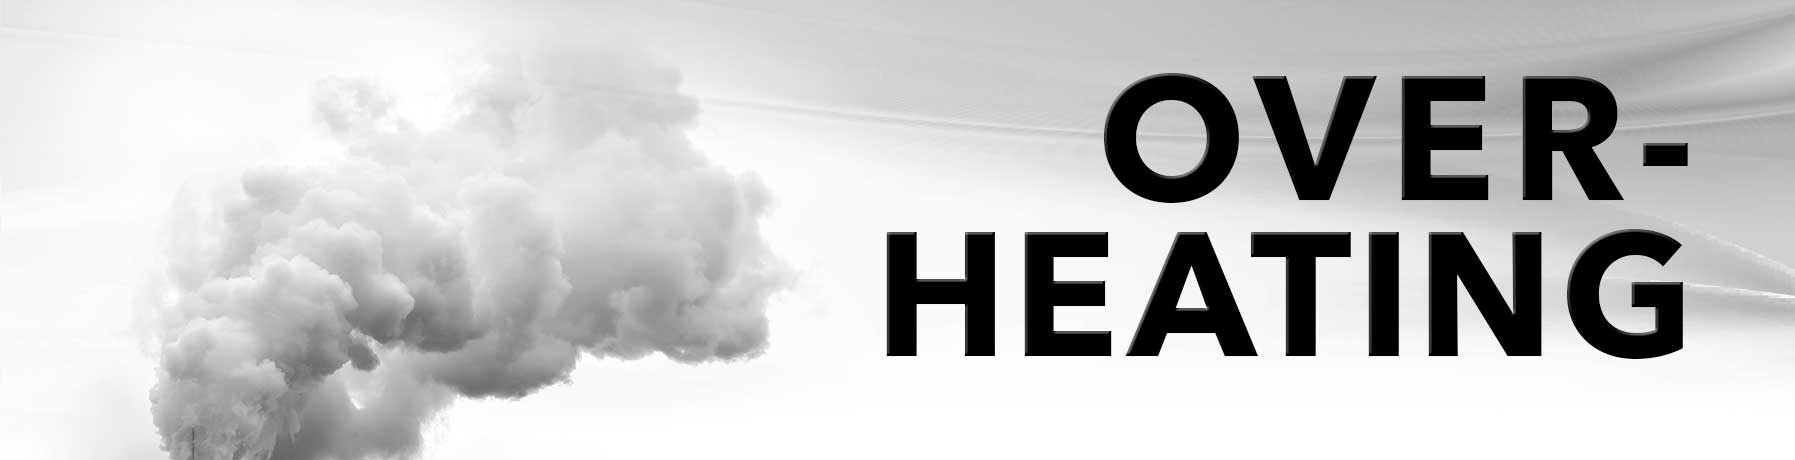 Overheating banner image with picture of a cloud of steam